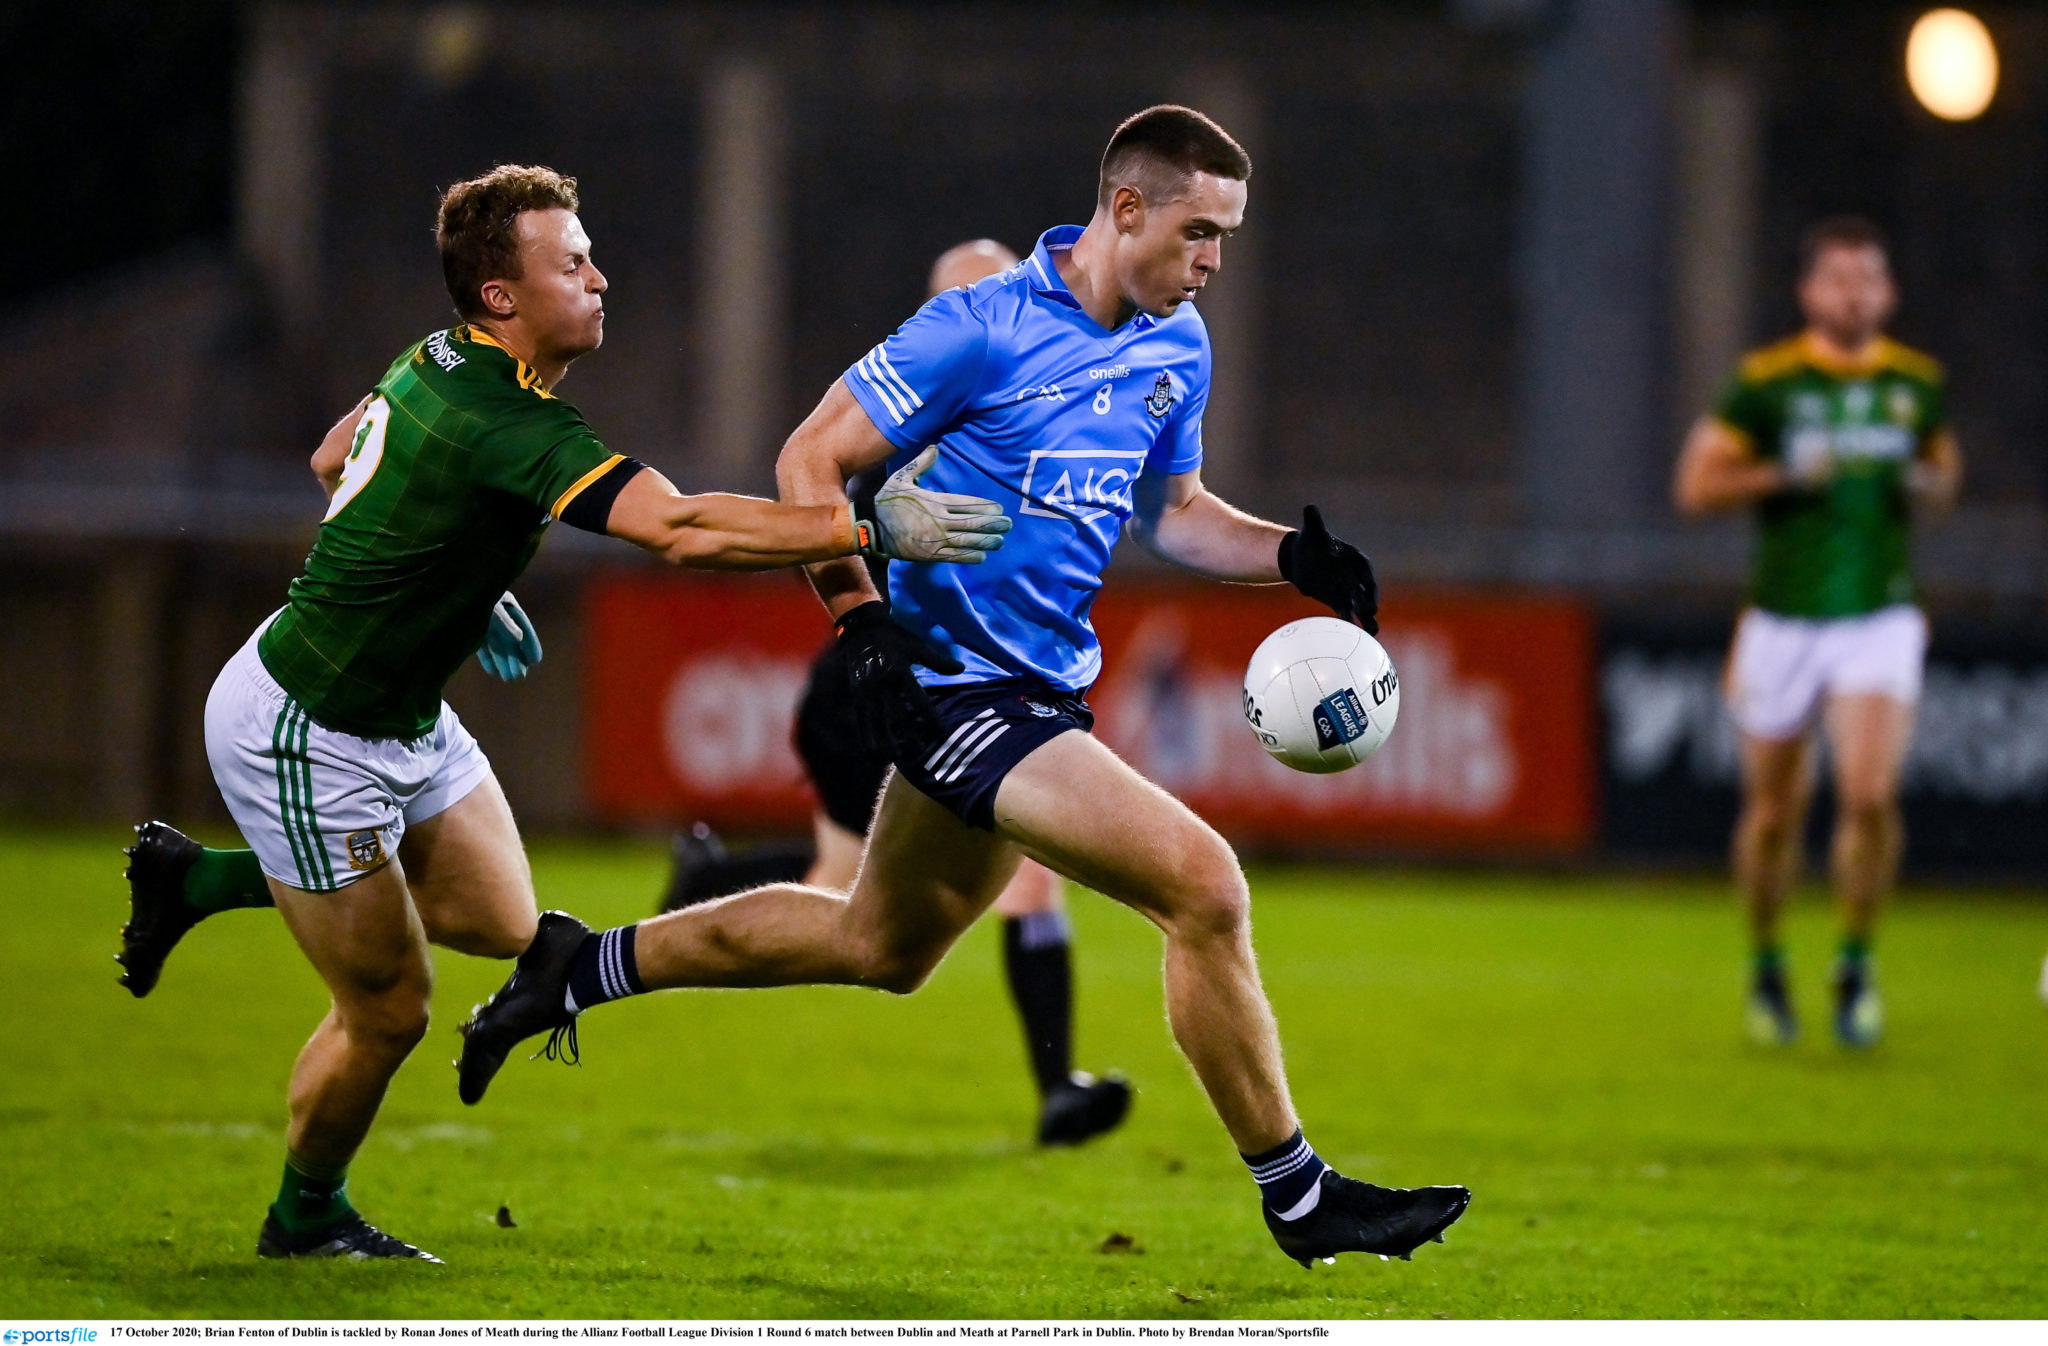 Brian Fenton drives with the ball against Meath